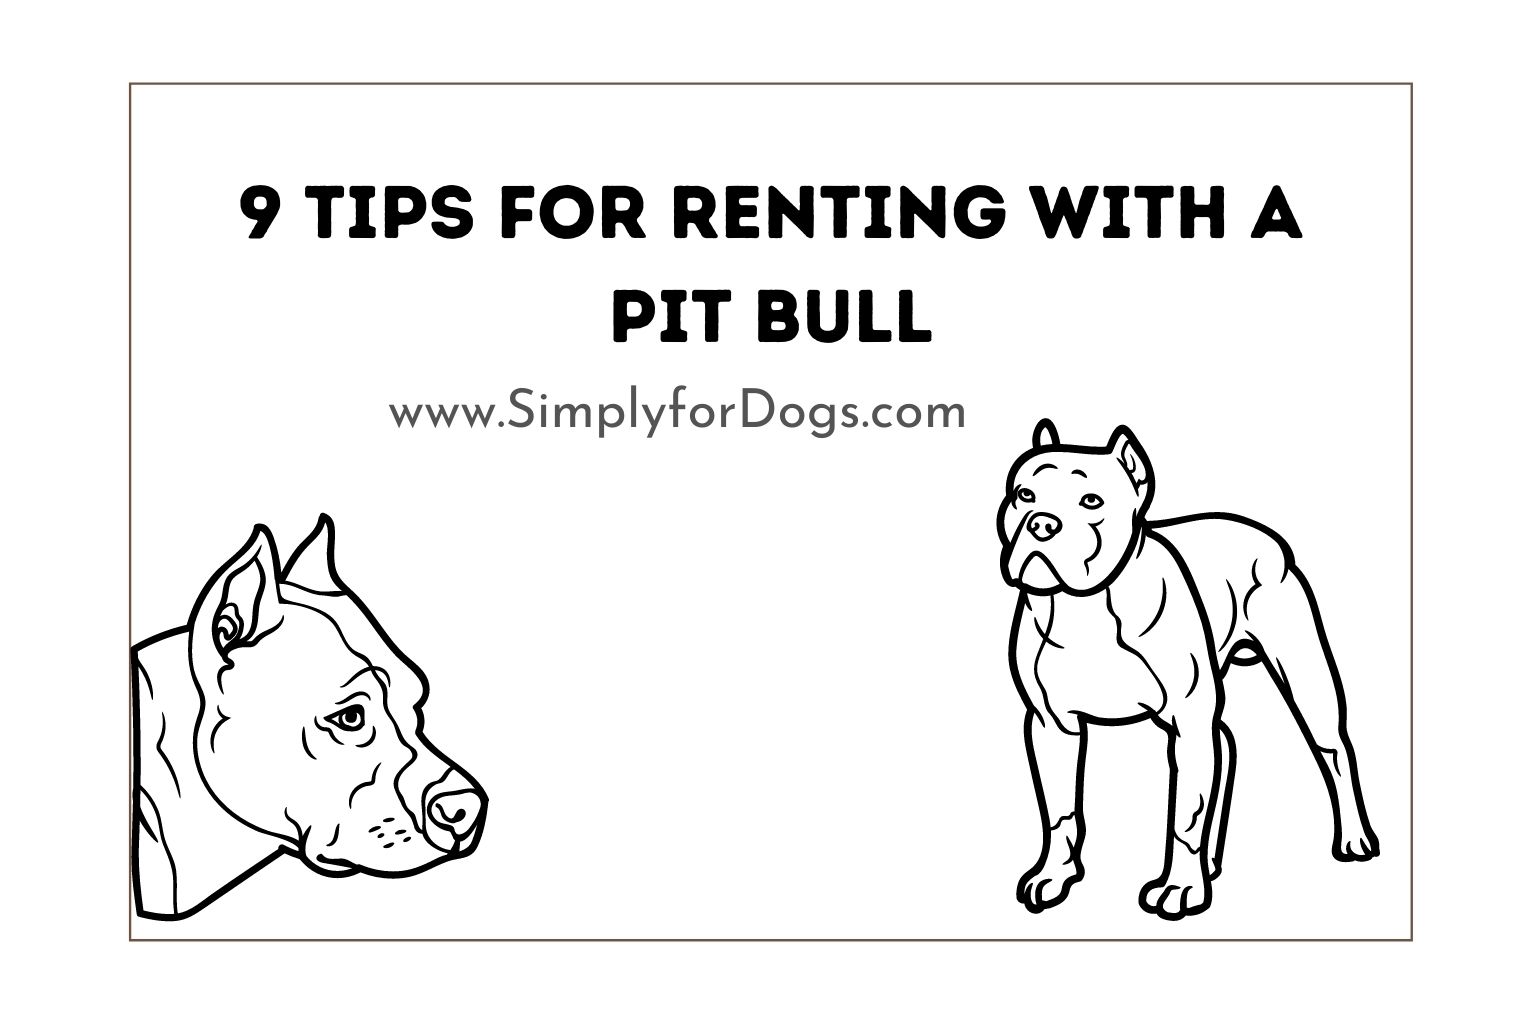 9 Tips for Renting with a Pit Bull